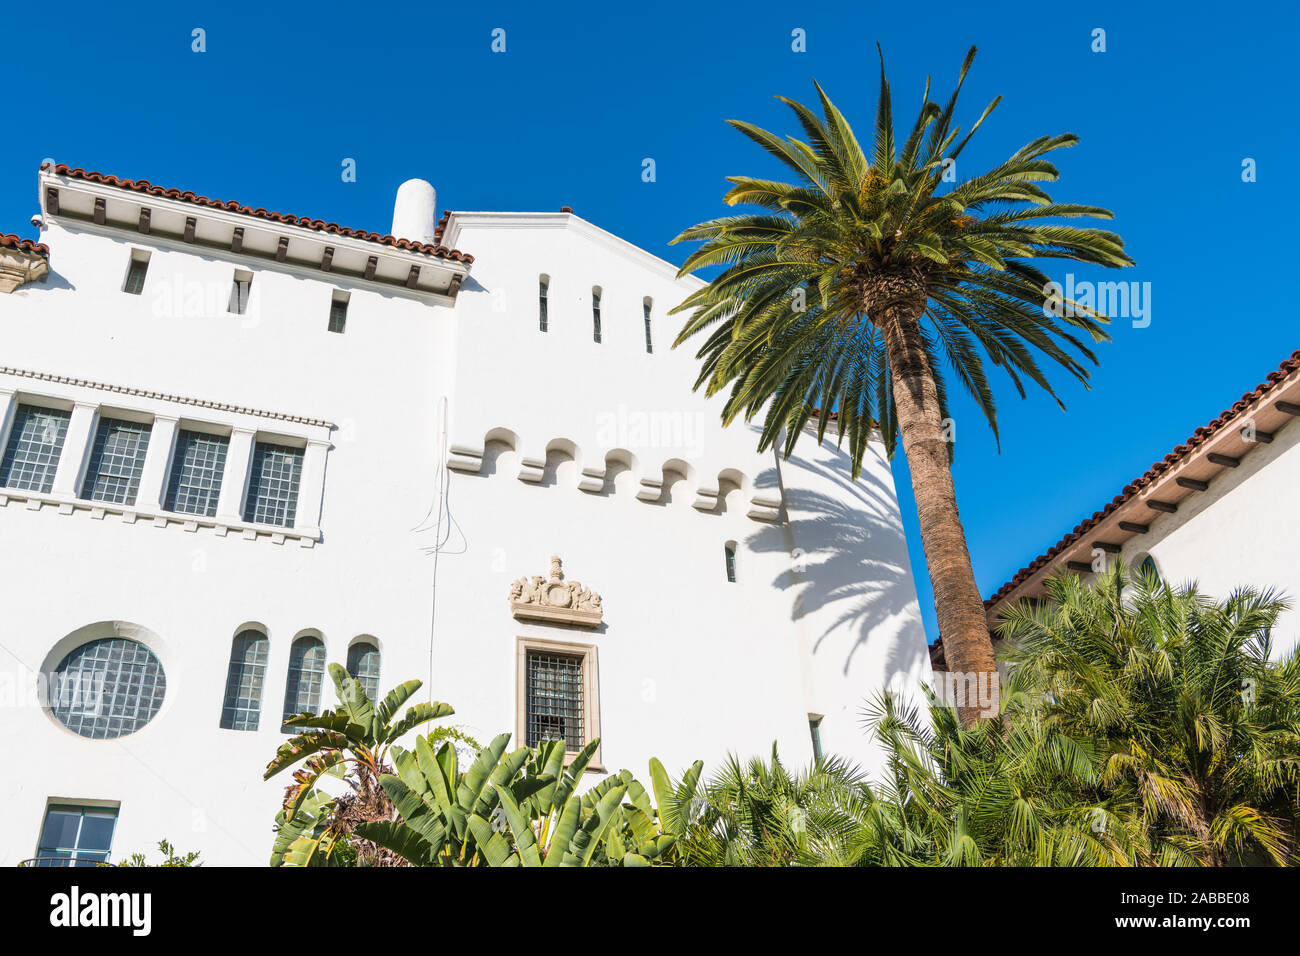 A palm tree and a historic white Spanish colonial revival architecture style building with ornate windows and trim in Santa Barbara, California, USA Stock Photo